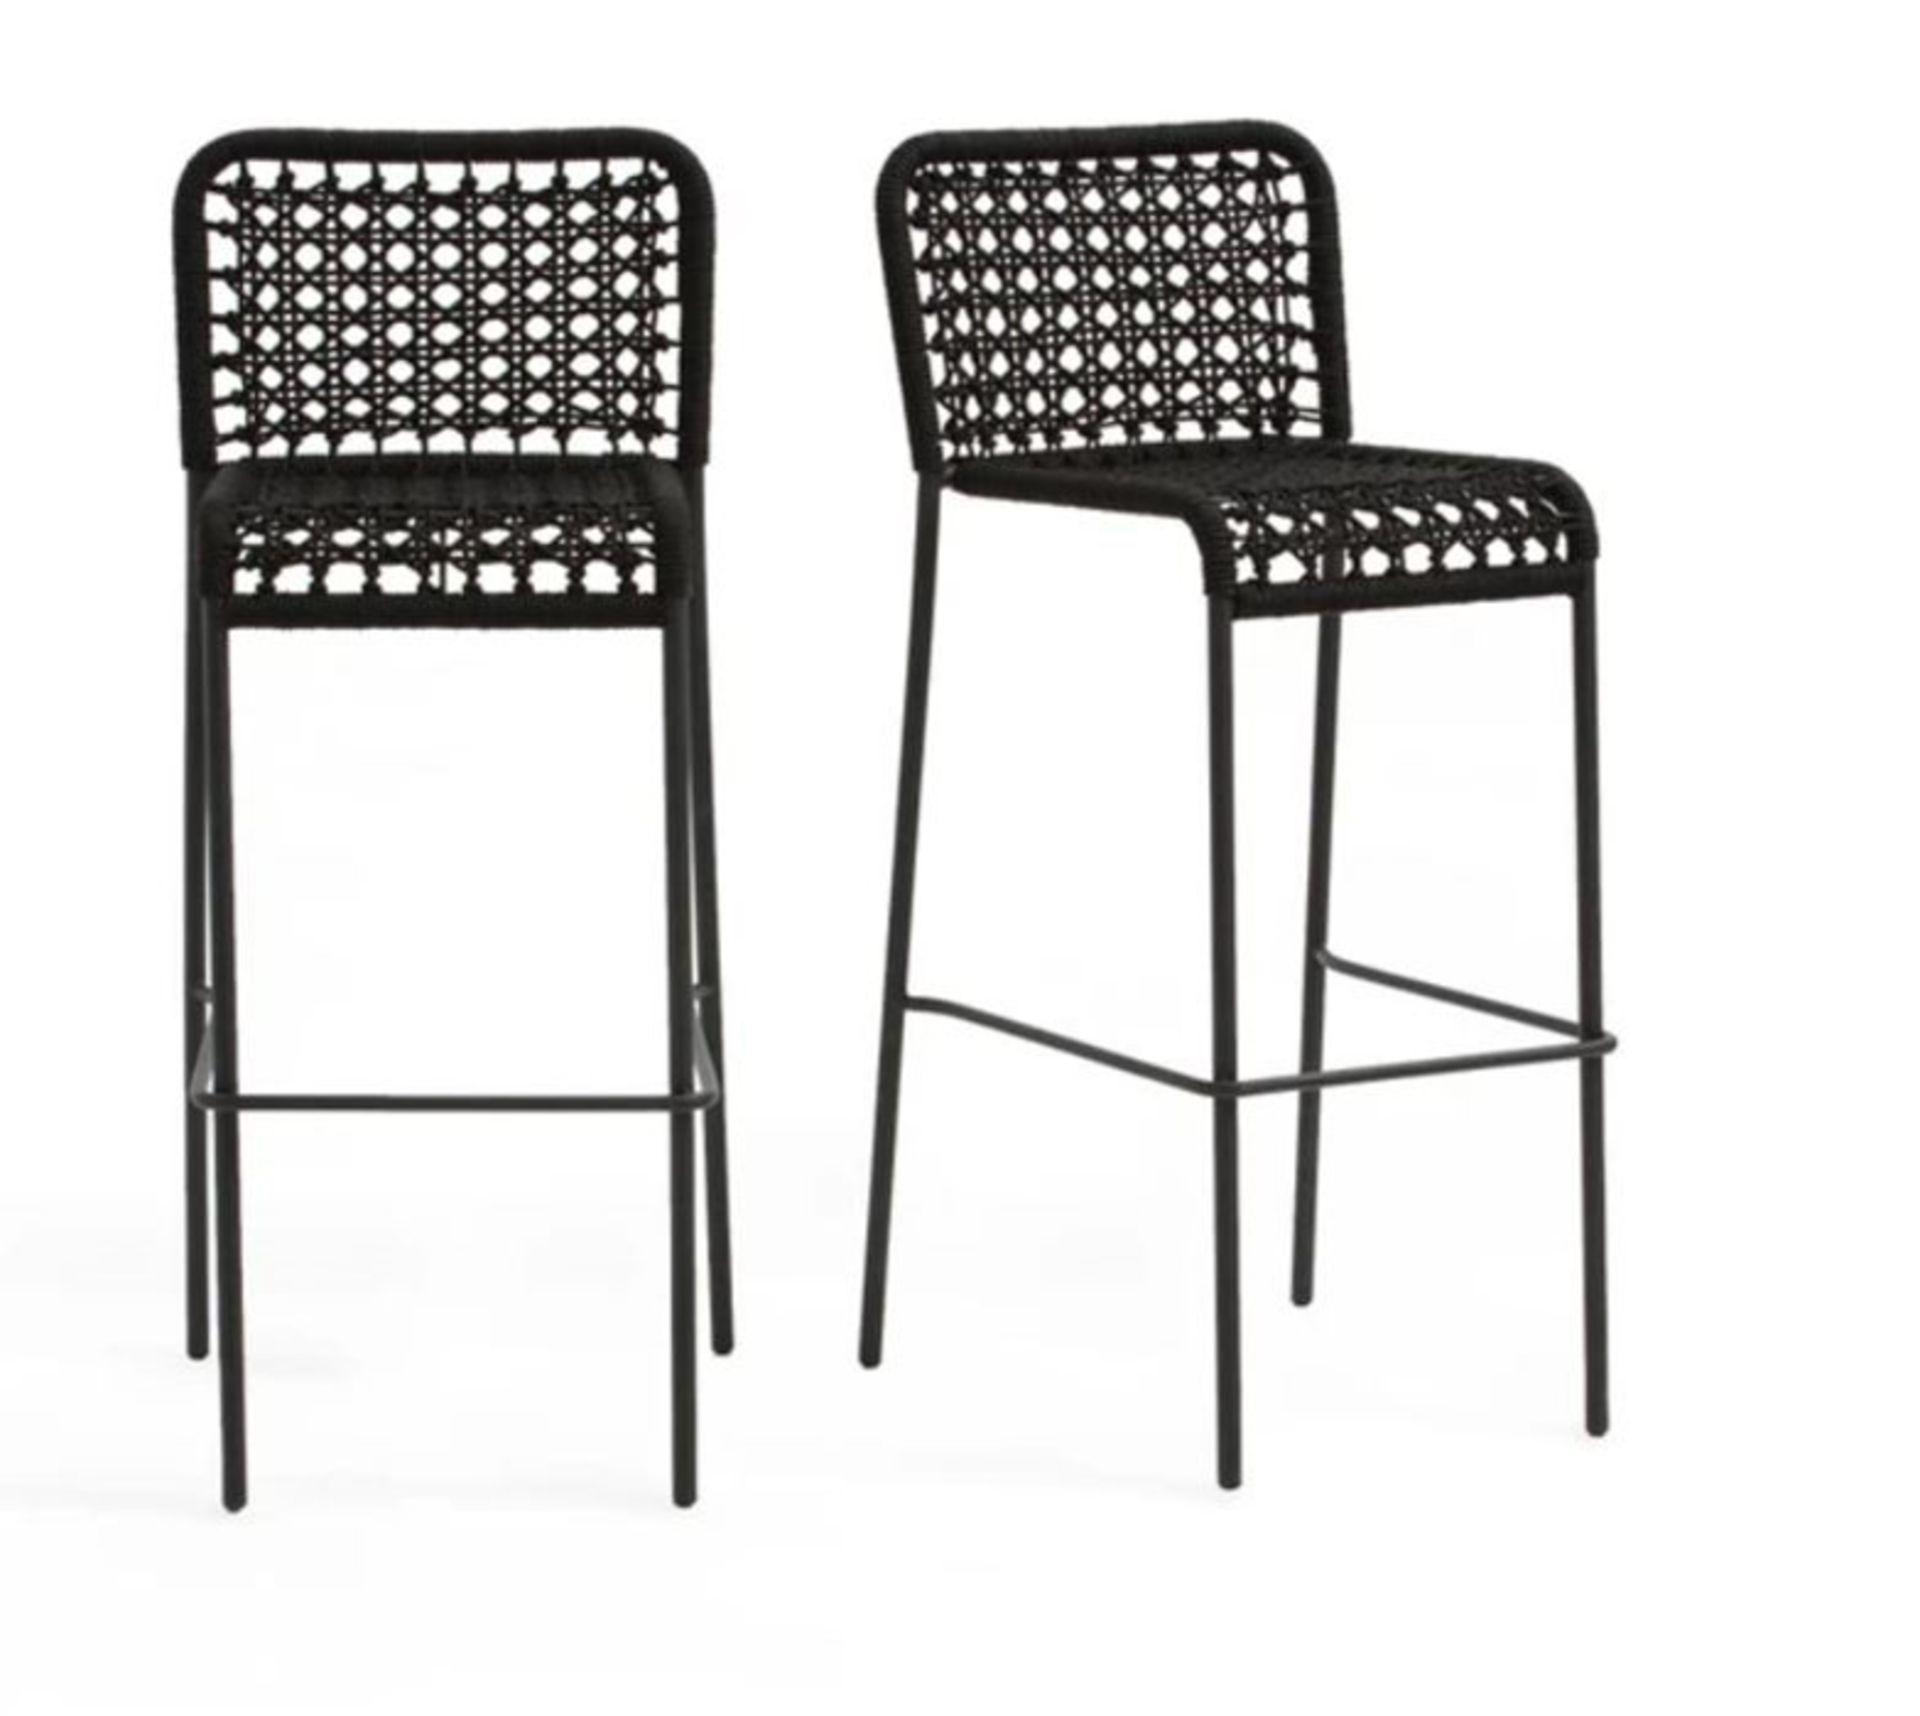 1 GRADE A DESIGNER SET OF 2 SAPHIR METAL AND WOVEN CORD OUTDOOR HIGH BAR STOOLS IN BLACK / RRP £